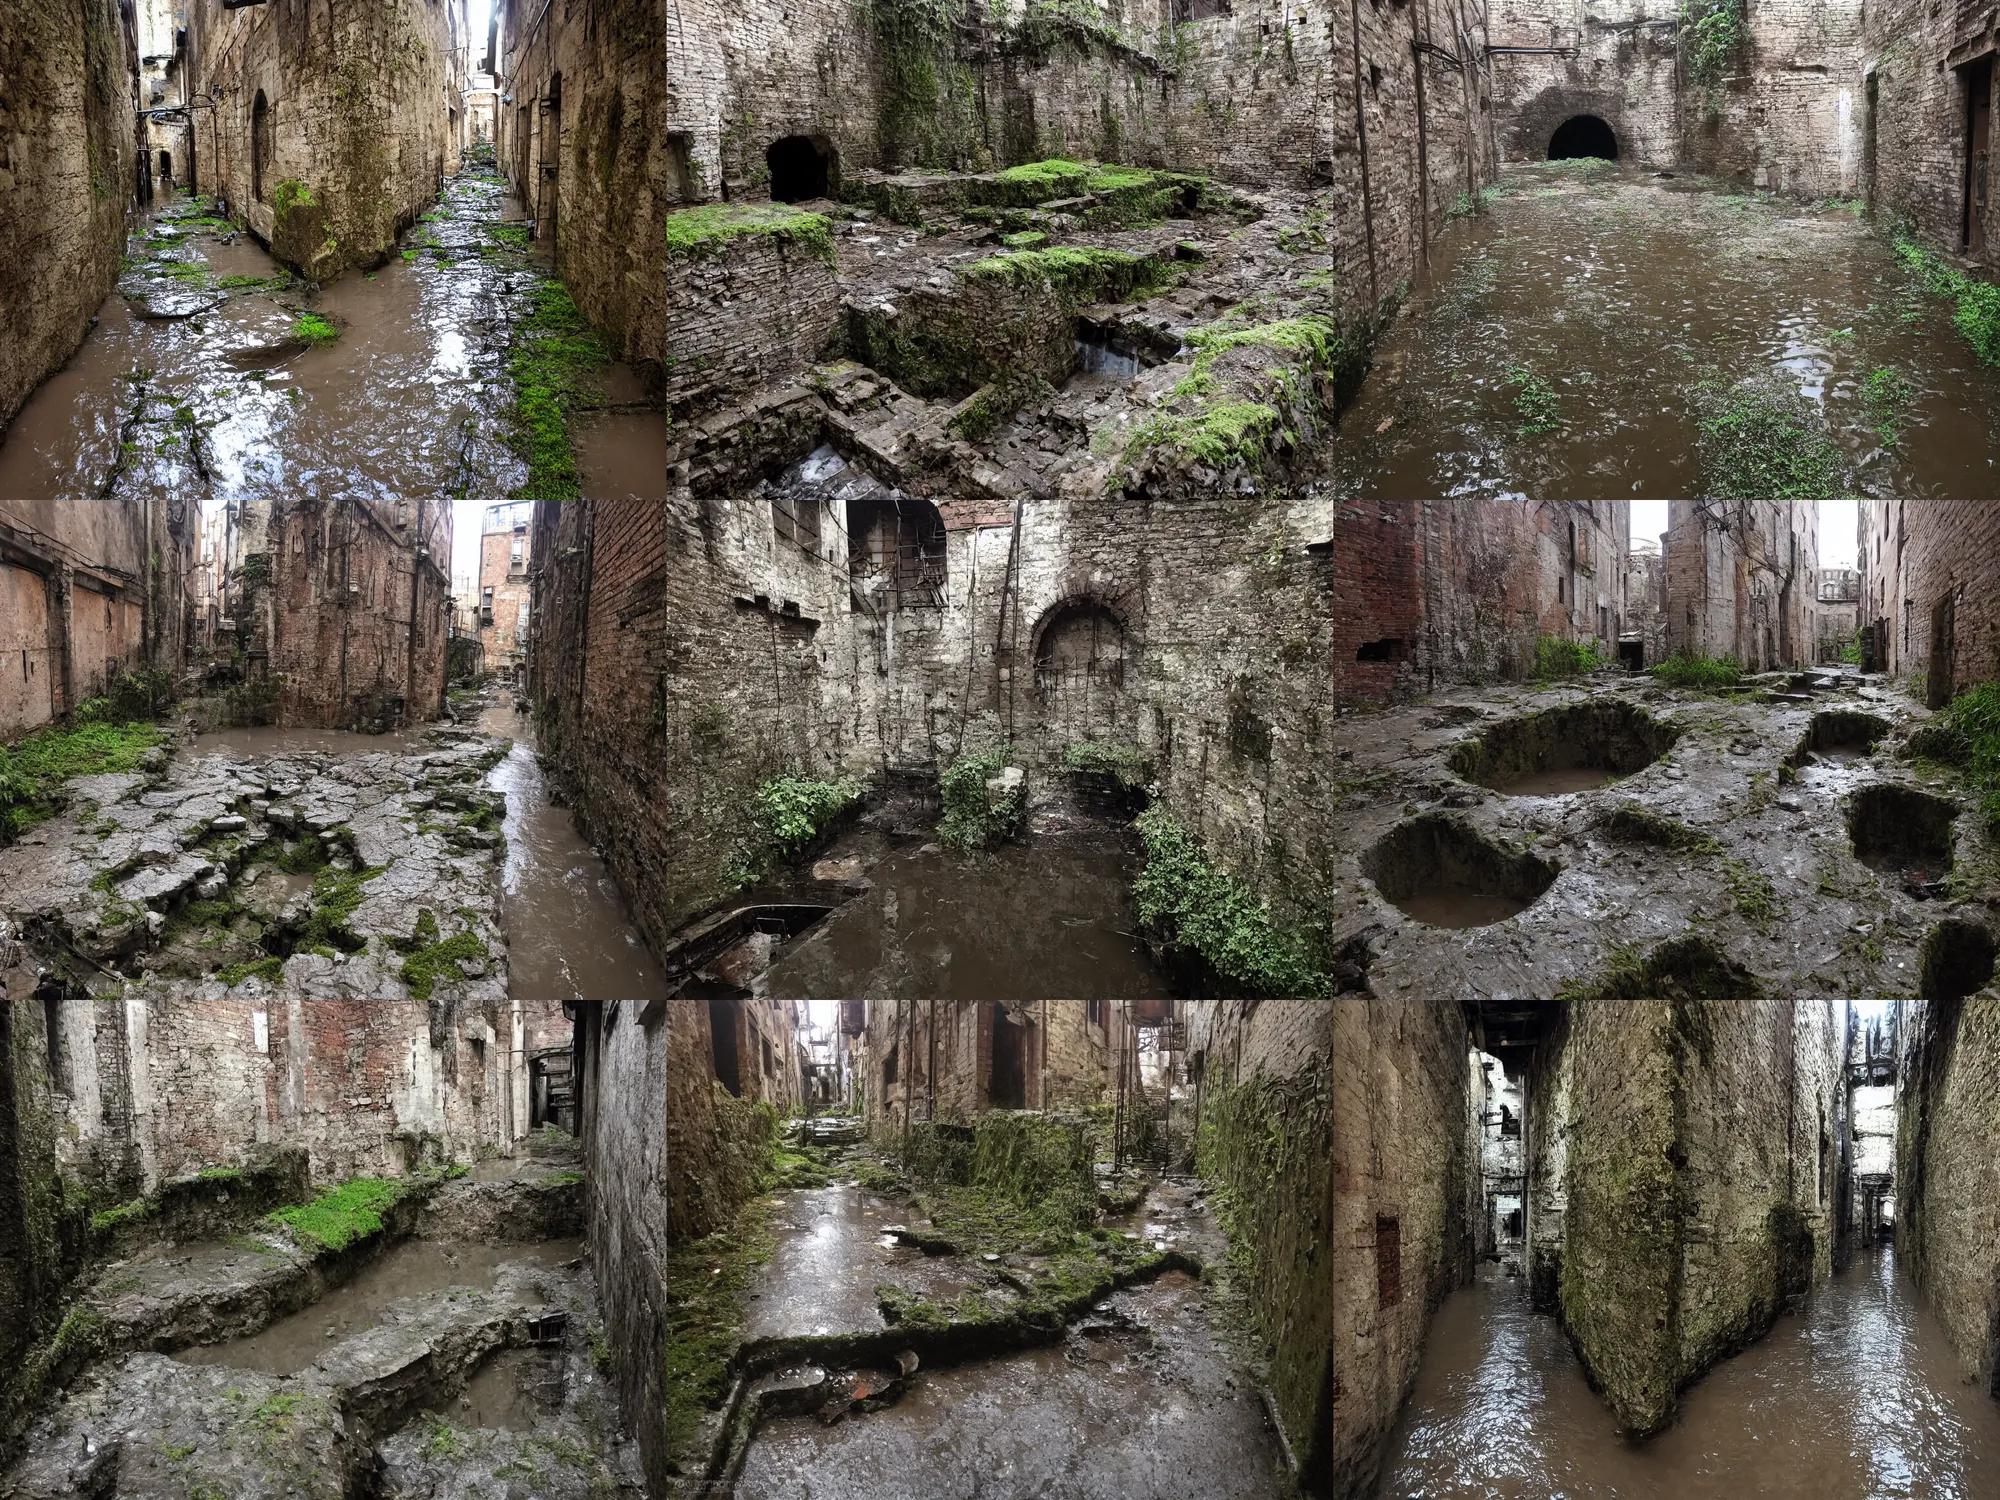 Prompt: inside the ancient flooded sewers in the old part of the city. dripping water, standing water, channel, stagnant water, waterfall, rivulets, musty, moss, underground, abandoned spaces, torch - lit.